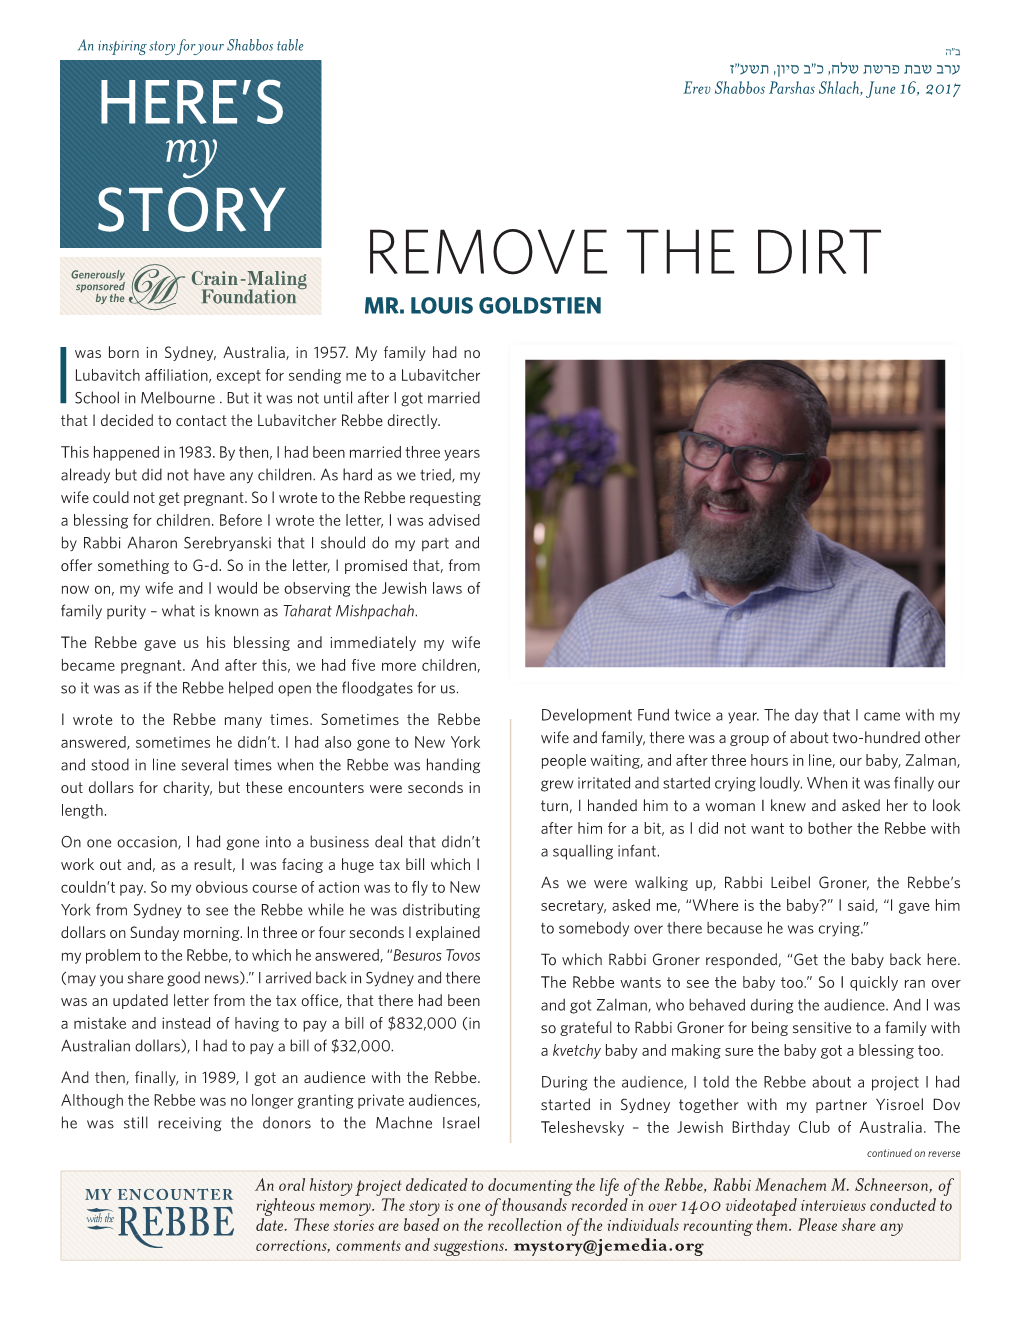 REMOVE the DIRT Sponsored by the MR